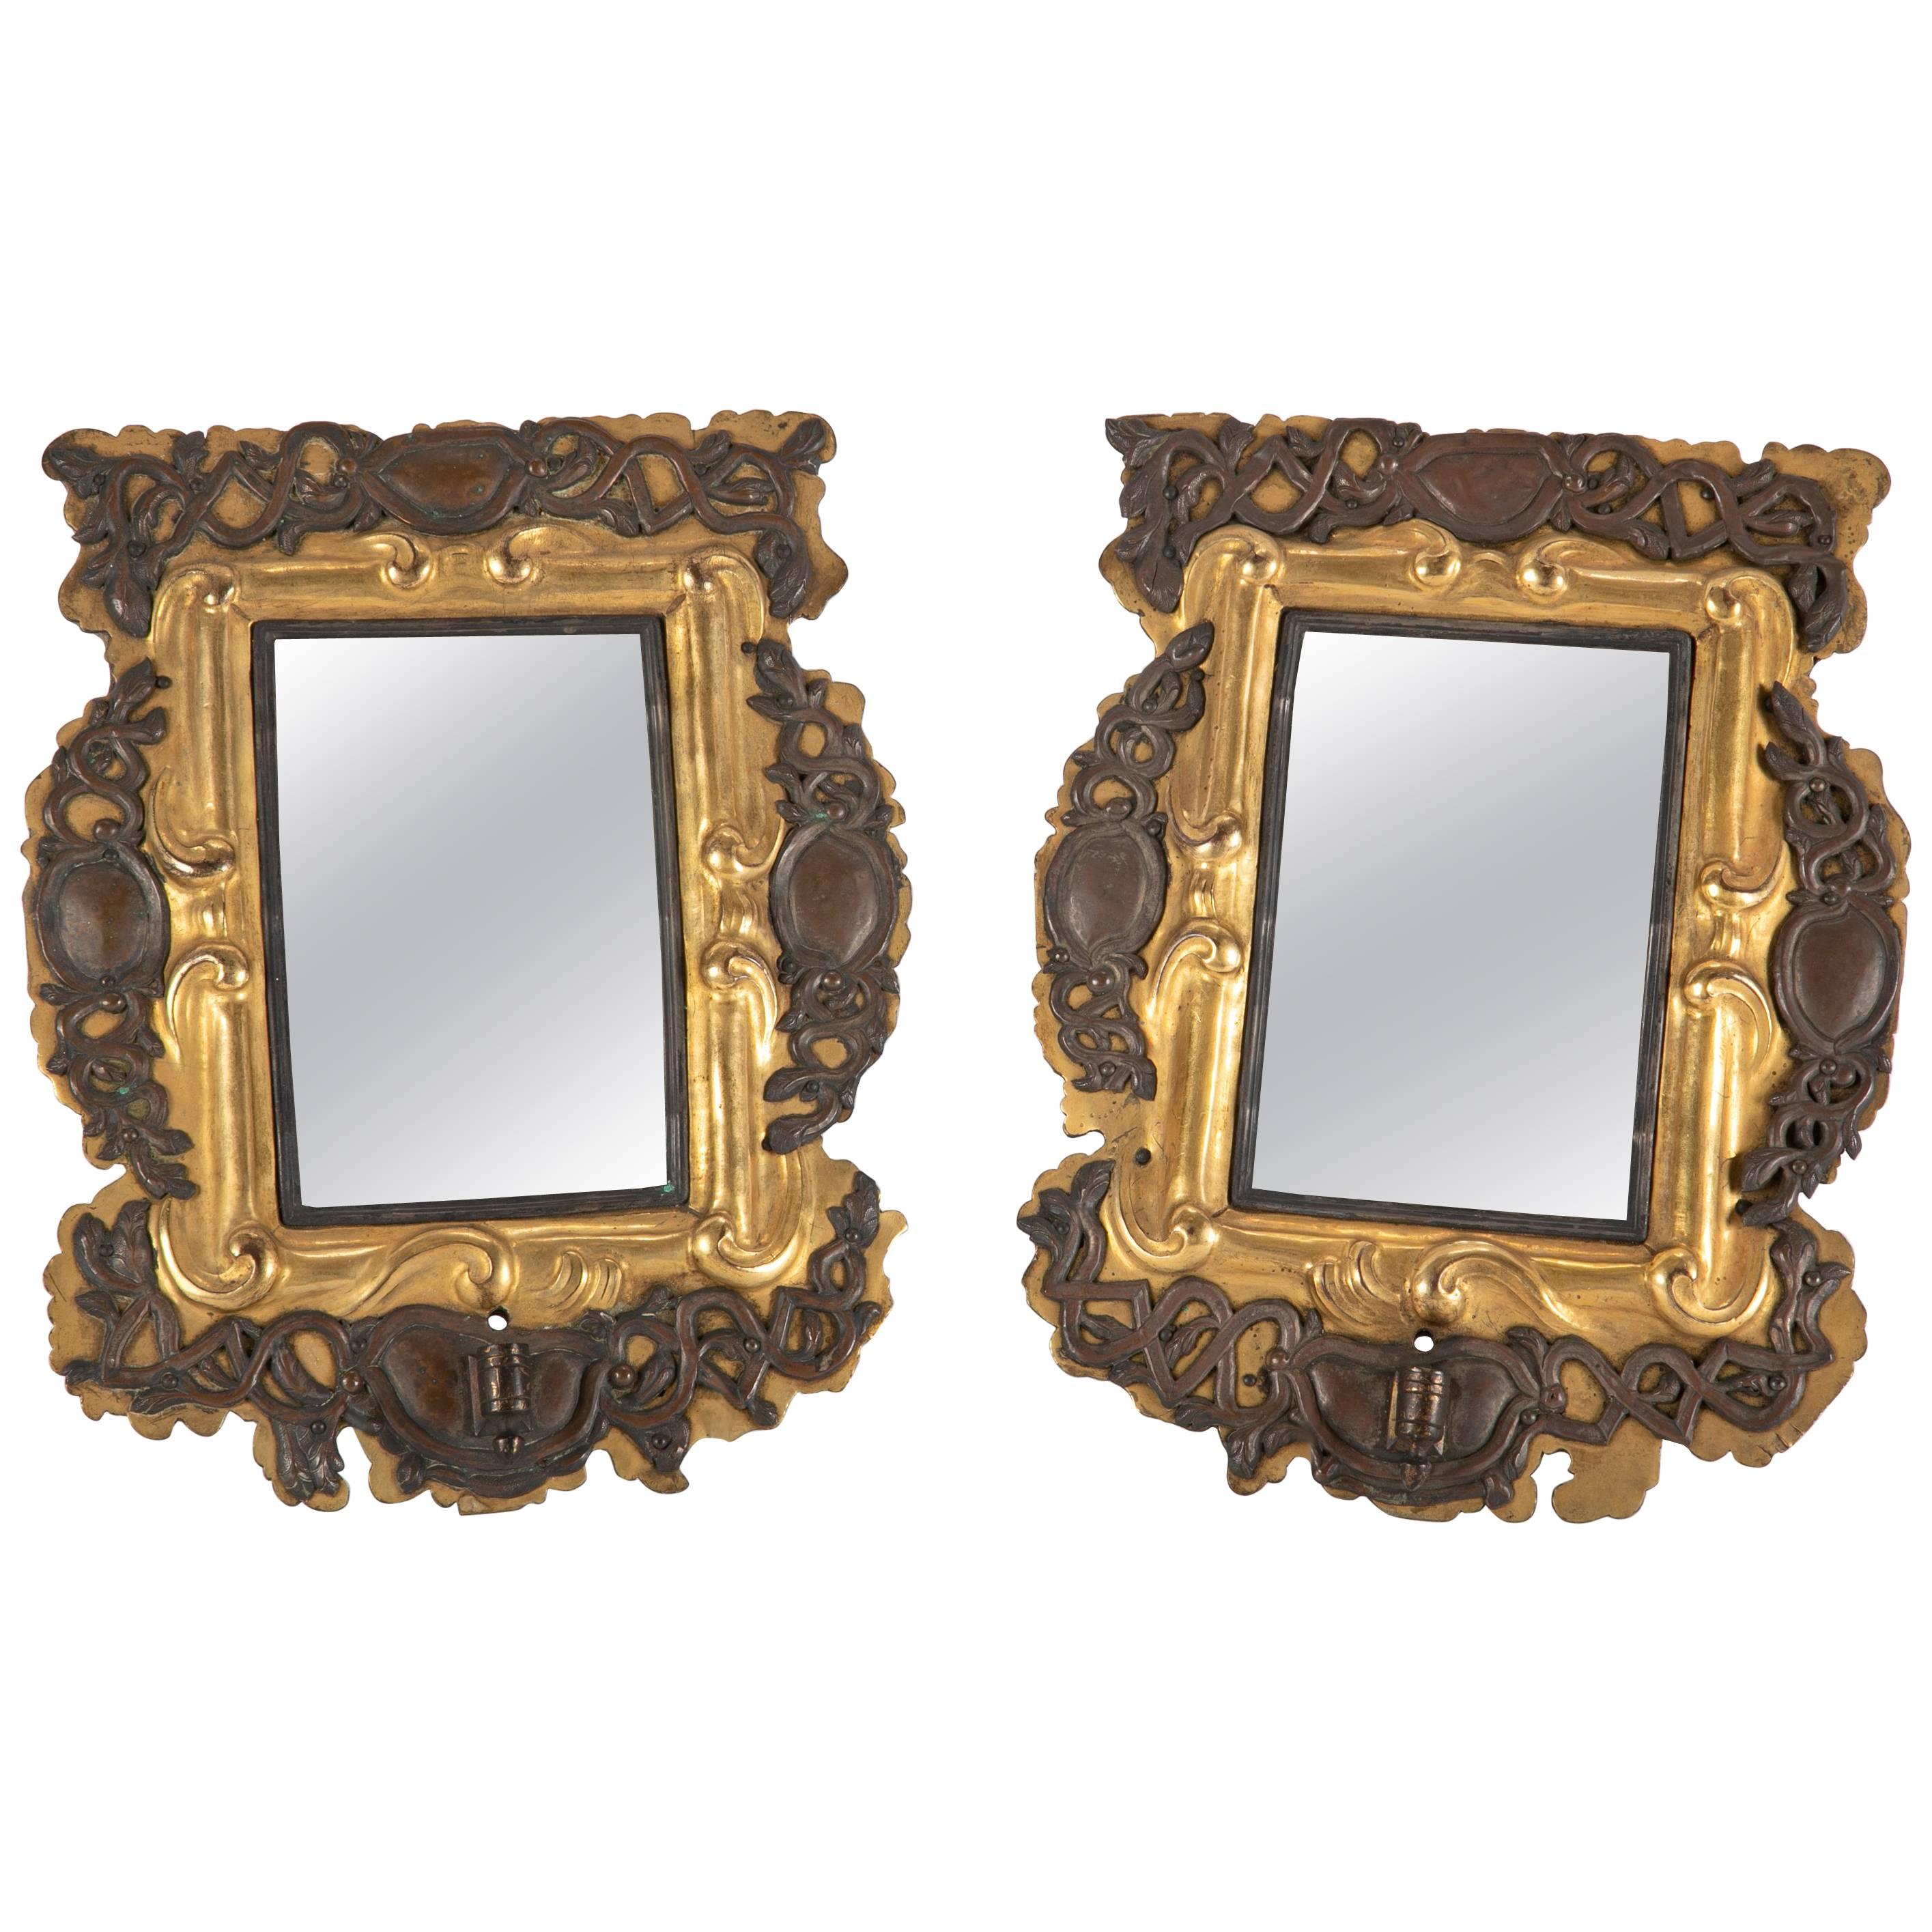 Pair of 18th Century Baltic Gilt Brass and Silver Mirror Sconces For Sale